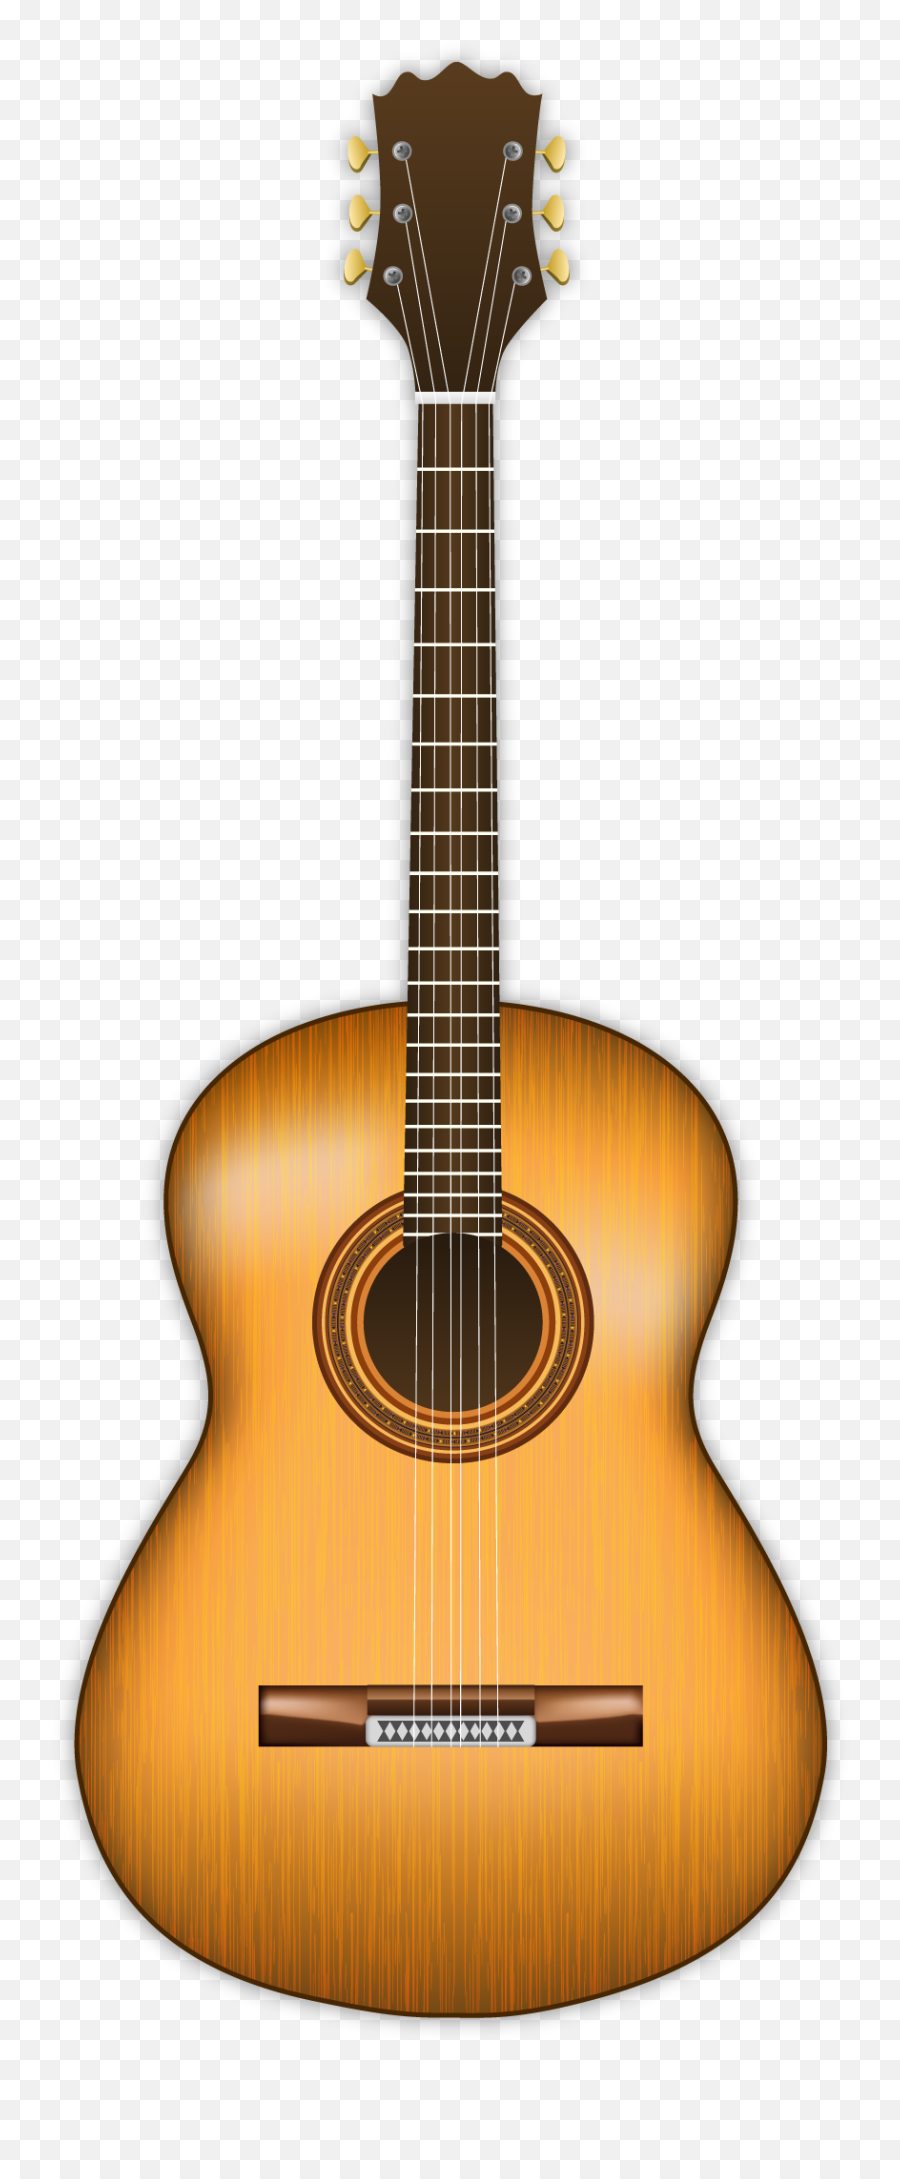 Today1582496994 Guitar Clipart Png Here - Instruments Used In Flamenco,Guitar Png Transparent